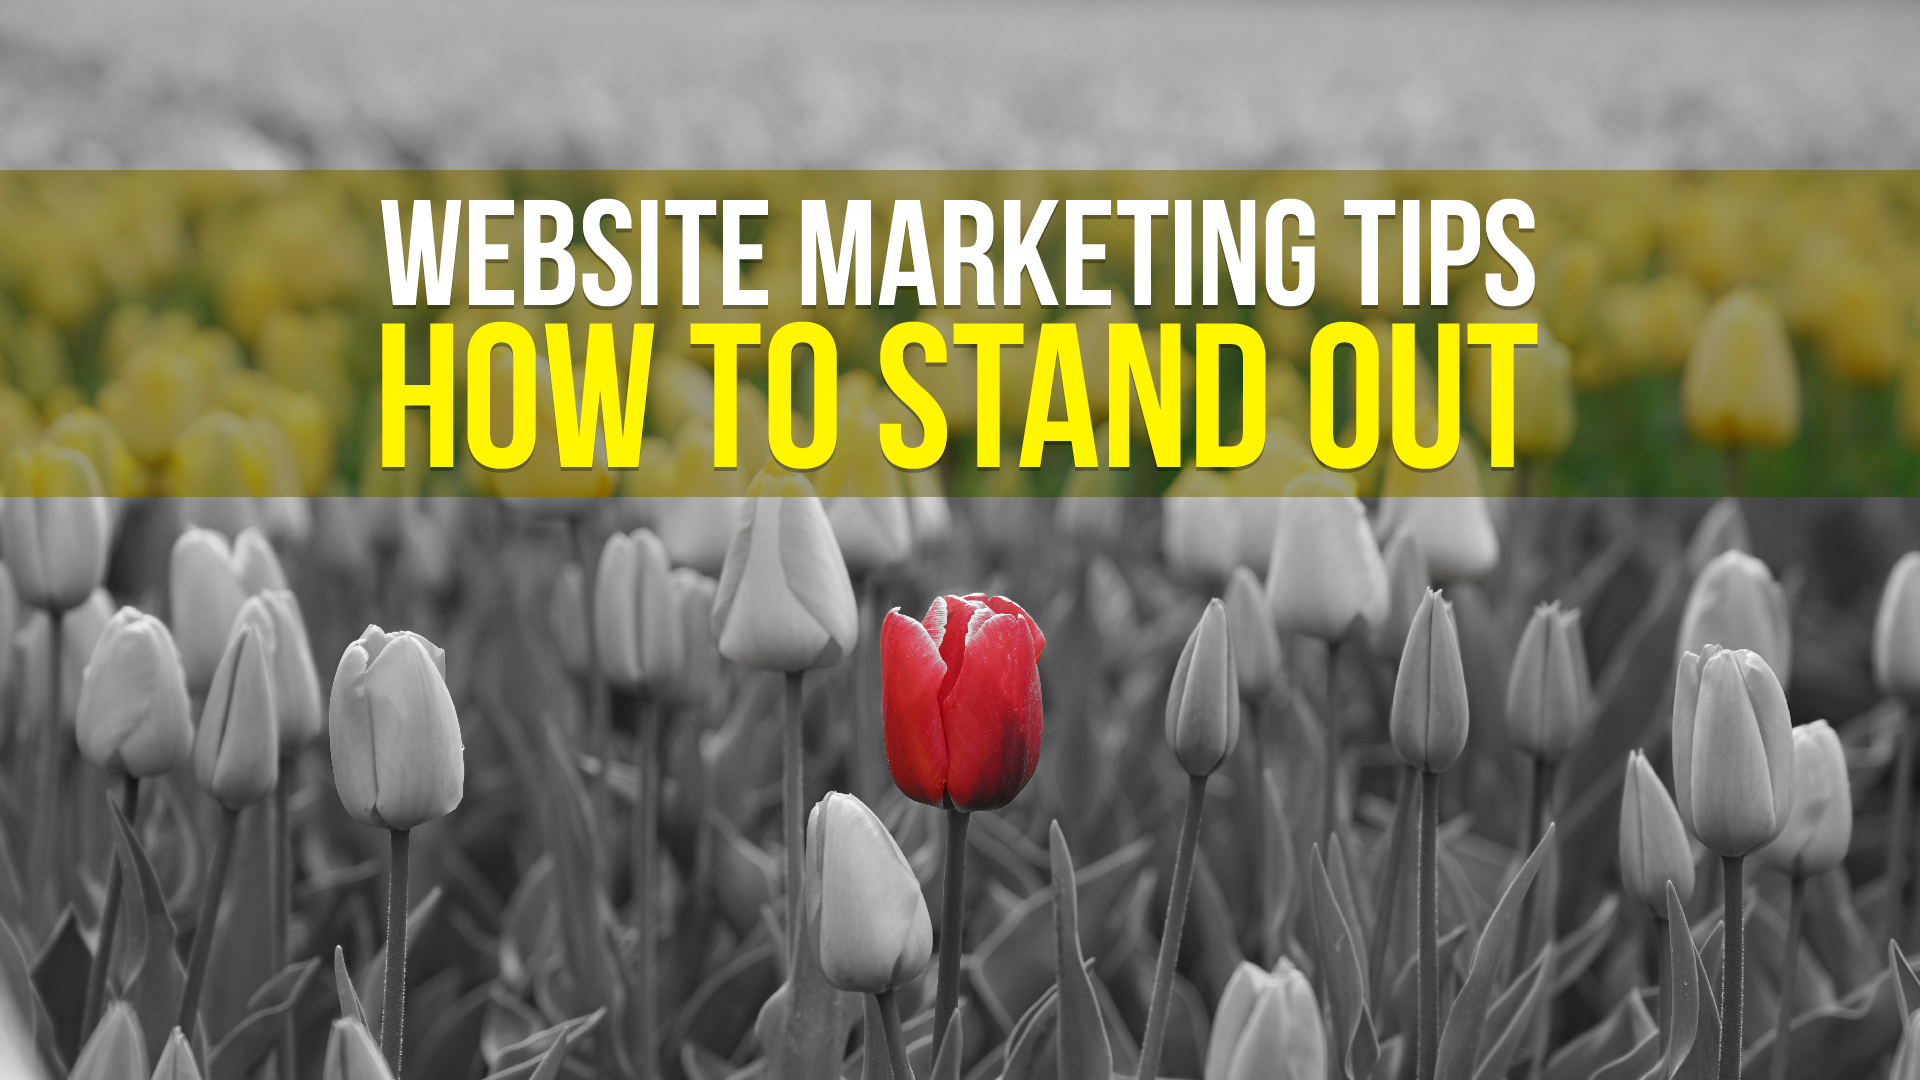 Website Marketing Tips: How to Stand Out